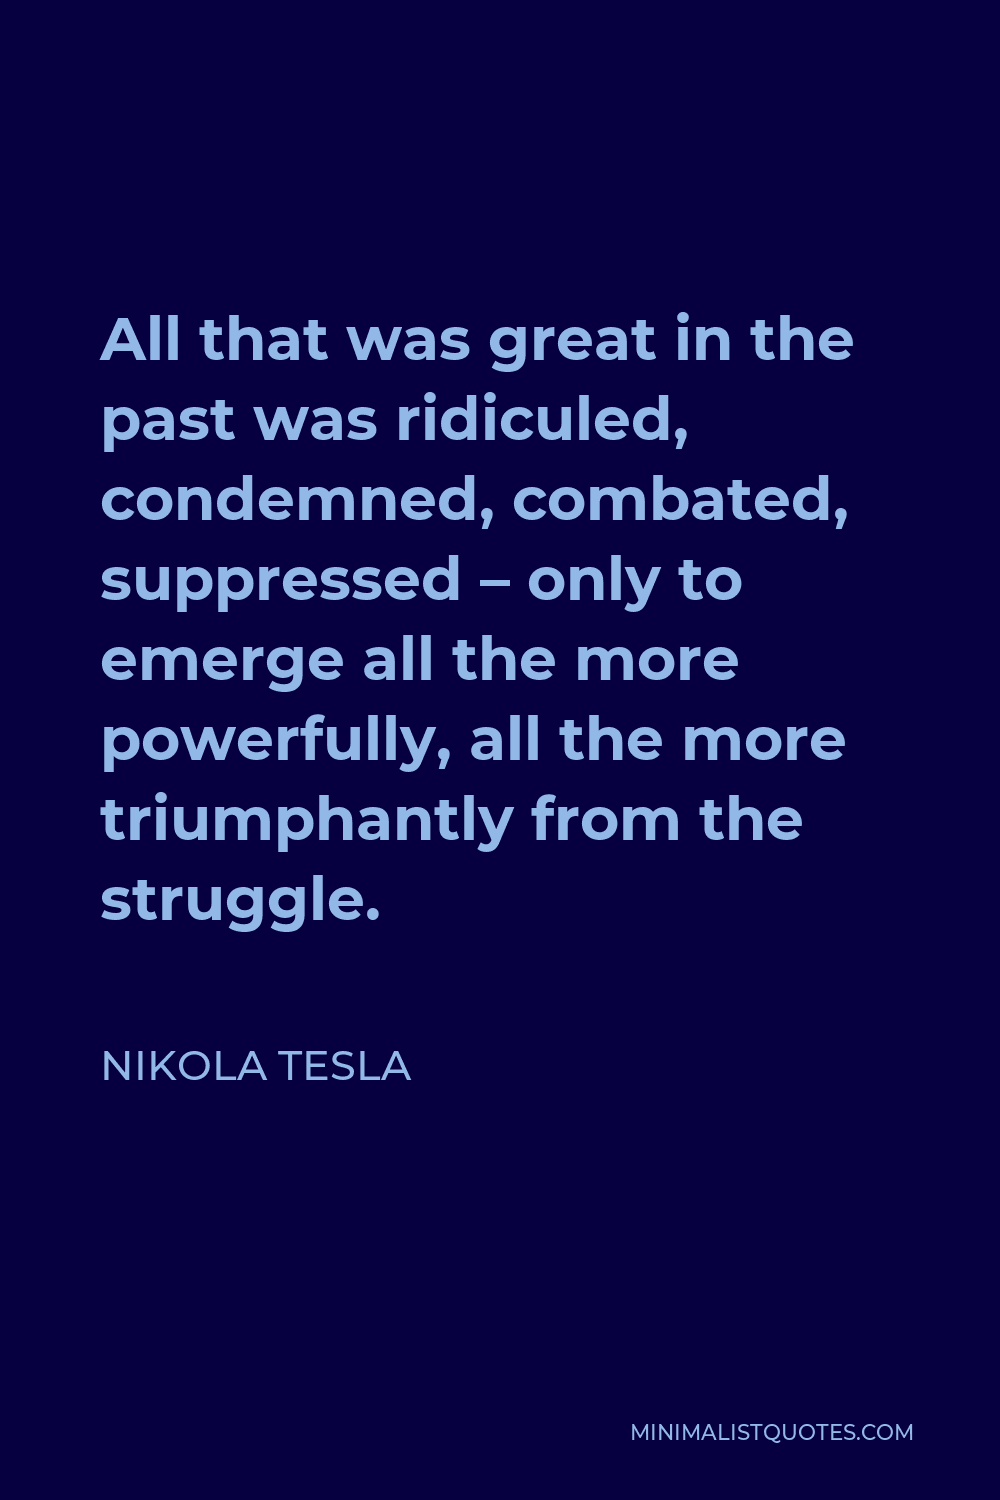 Nikola Tesla Quote - All that was great in the past was ridiculed, condemned, combated, suppressed – only to emerge all the more powerfully, all the more triumphantly from the struggle.